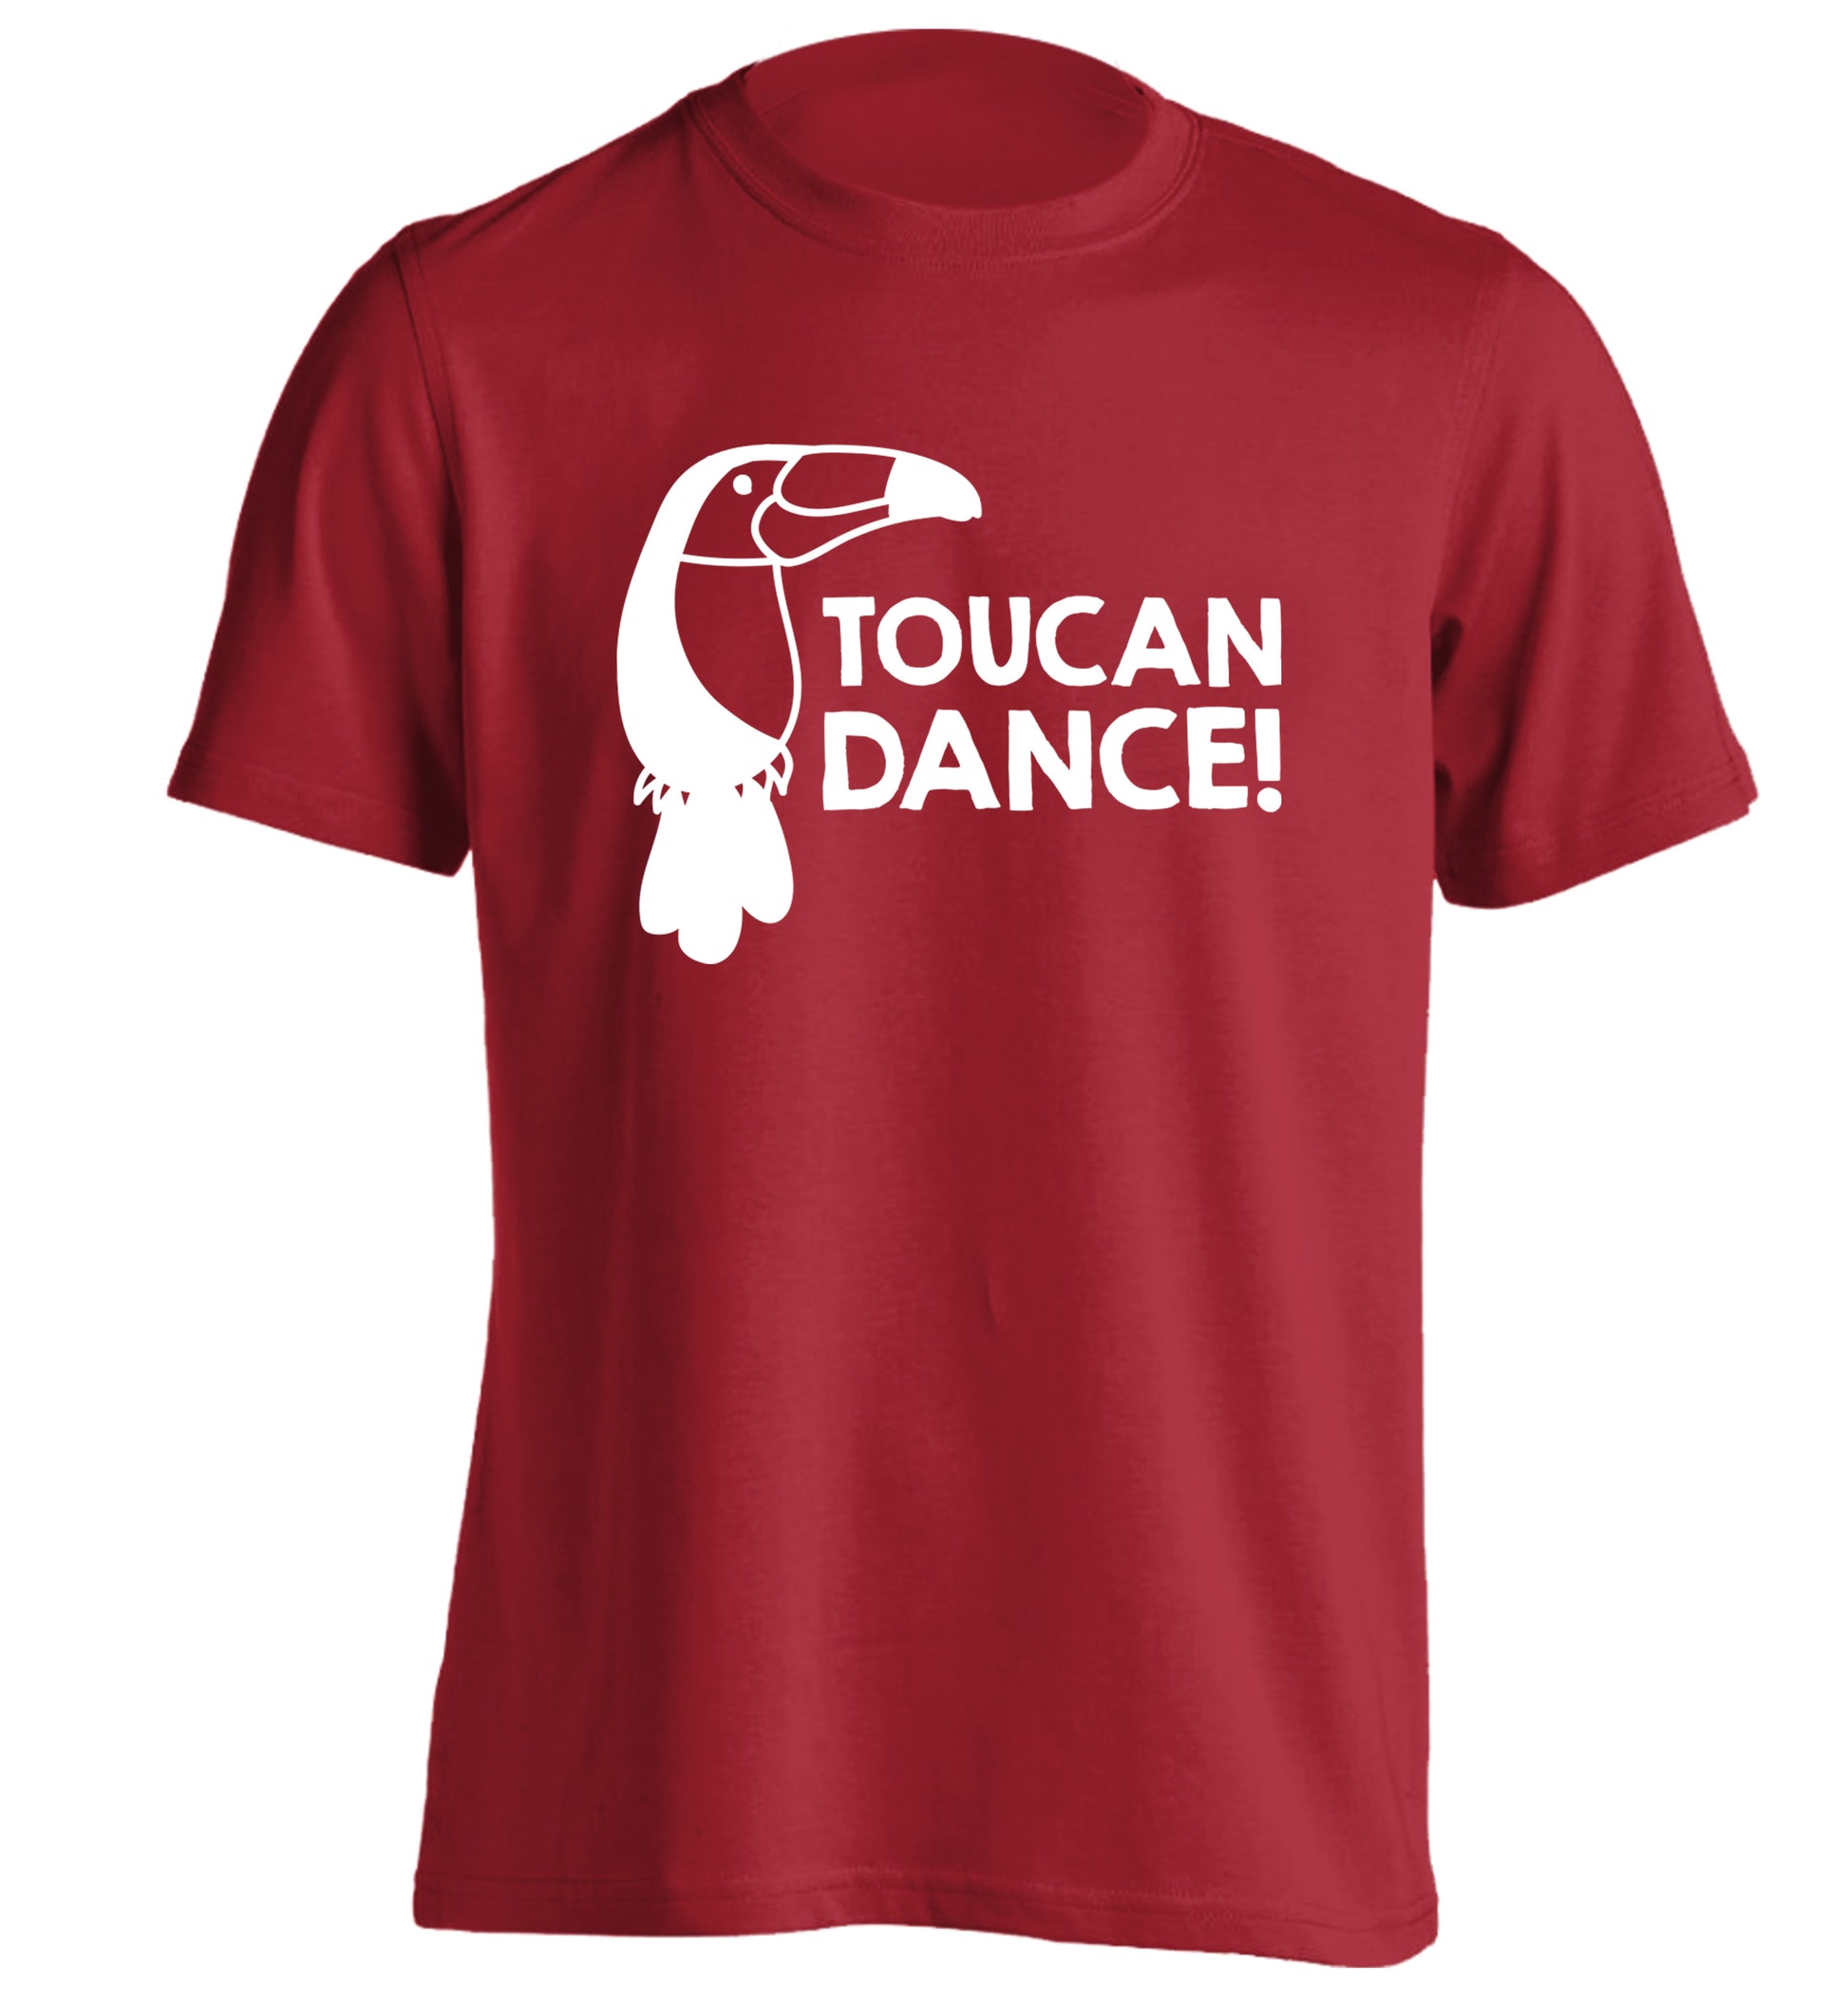 Toucan dance adults unisex red Tshirt 2XL